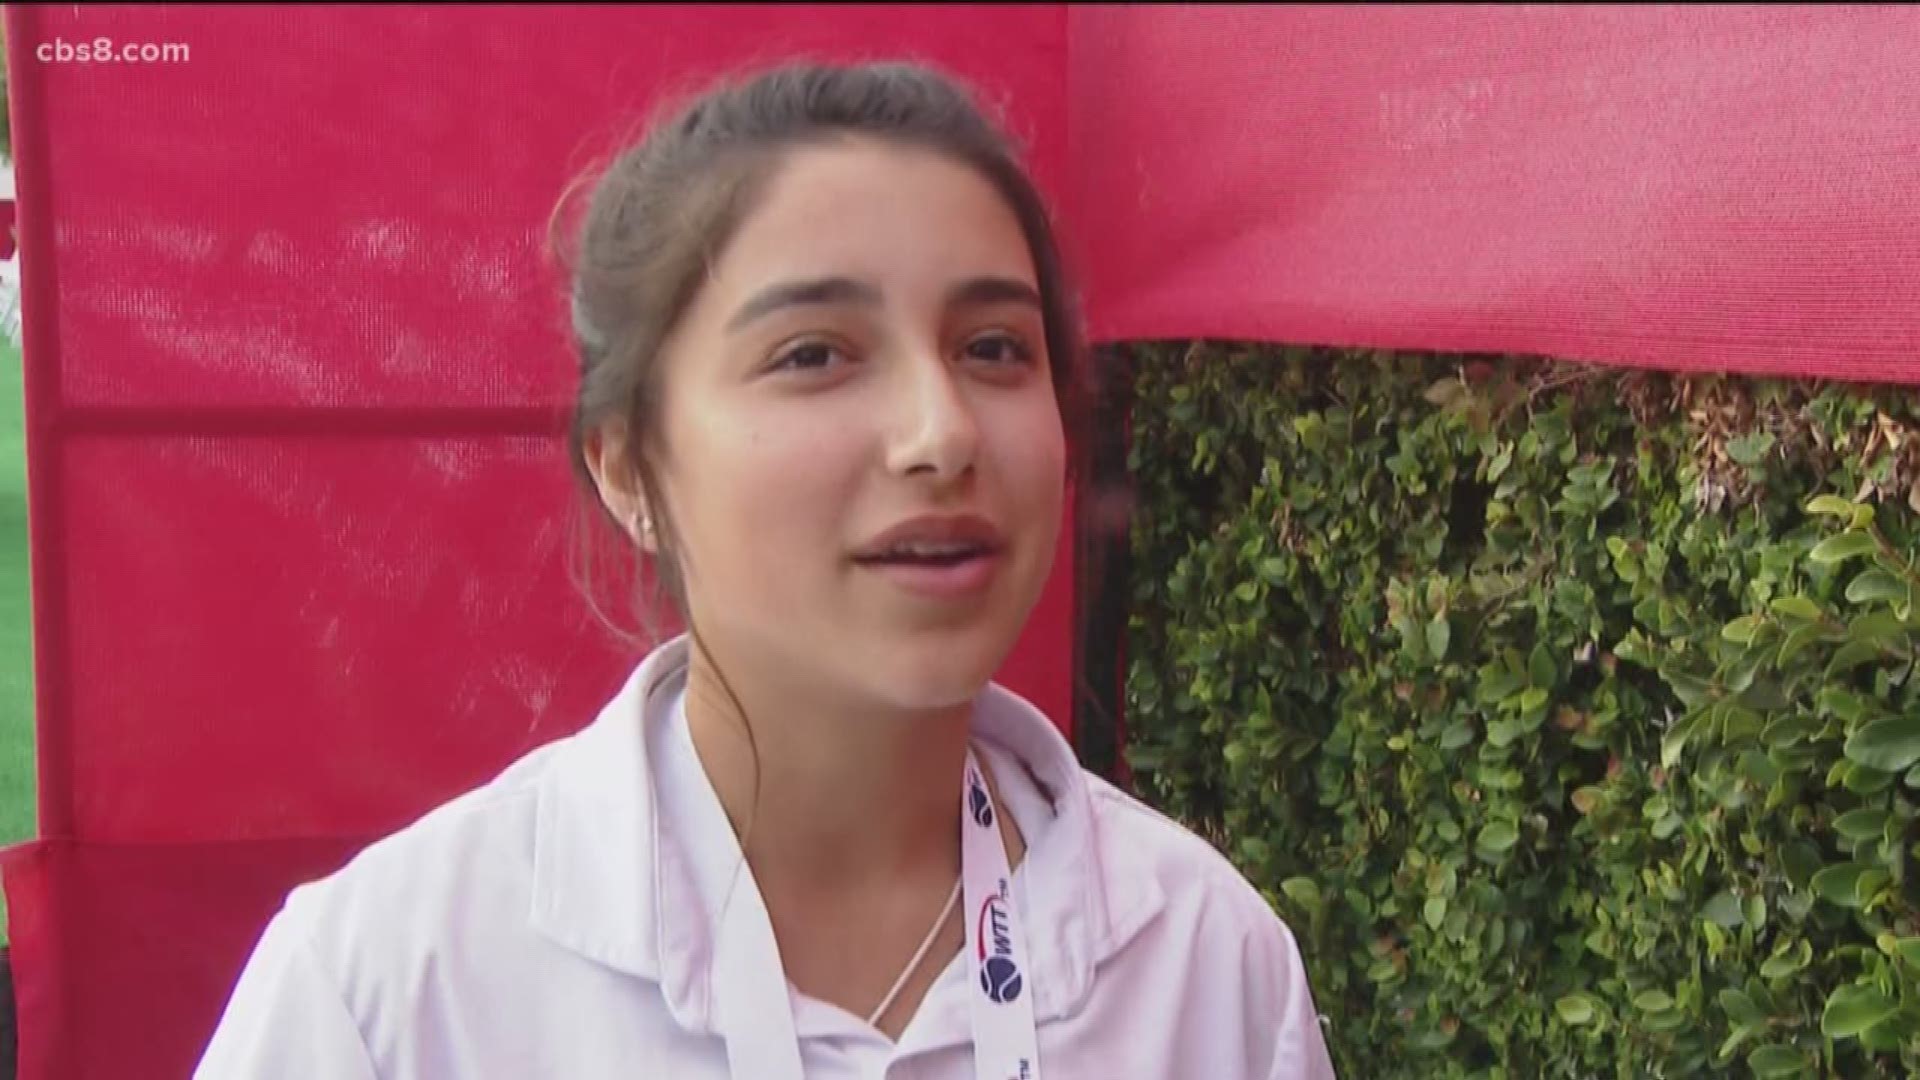 Three years ago a 12-year-old’s goal was to raise $16,000 to help build one home in Tijuana for a family in need. Her determination grew over time and now the San Diego Aviators teamed up with her to support her mission.